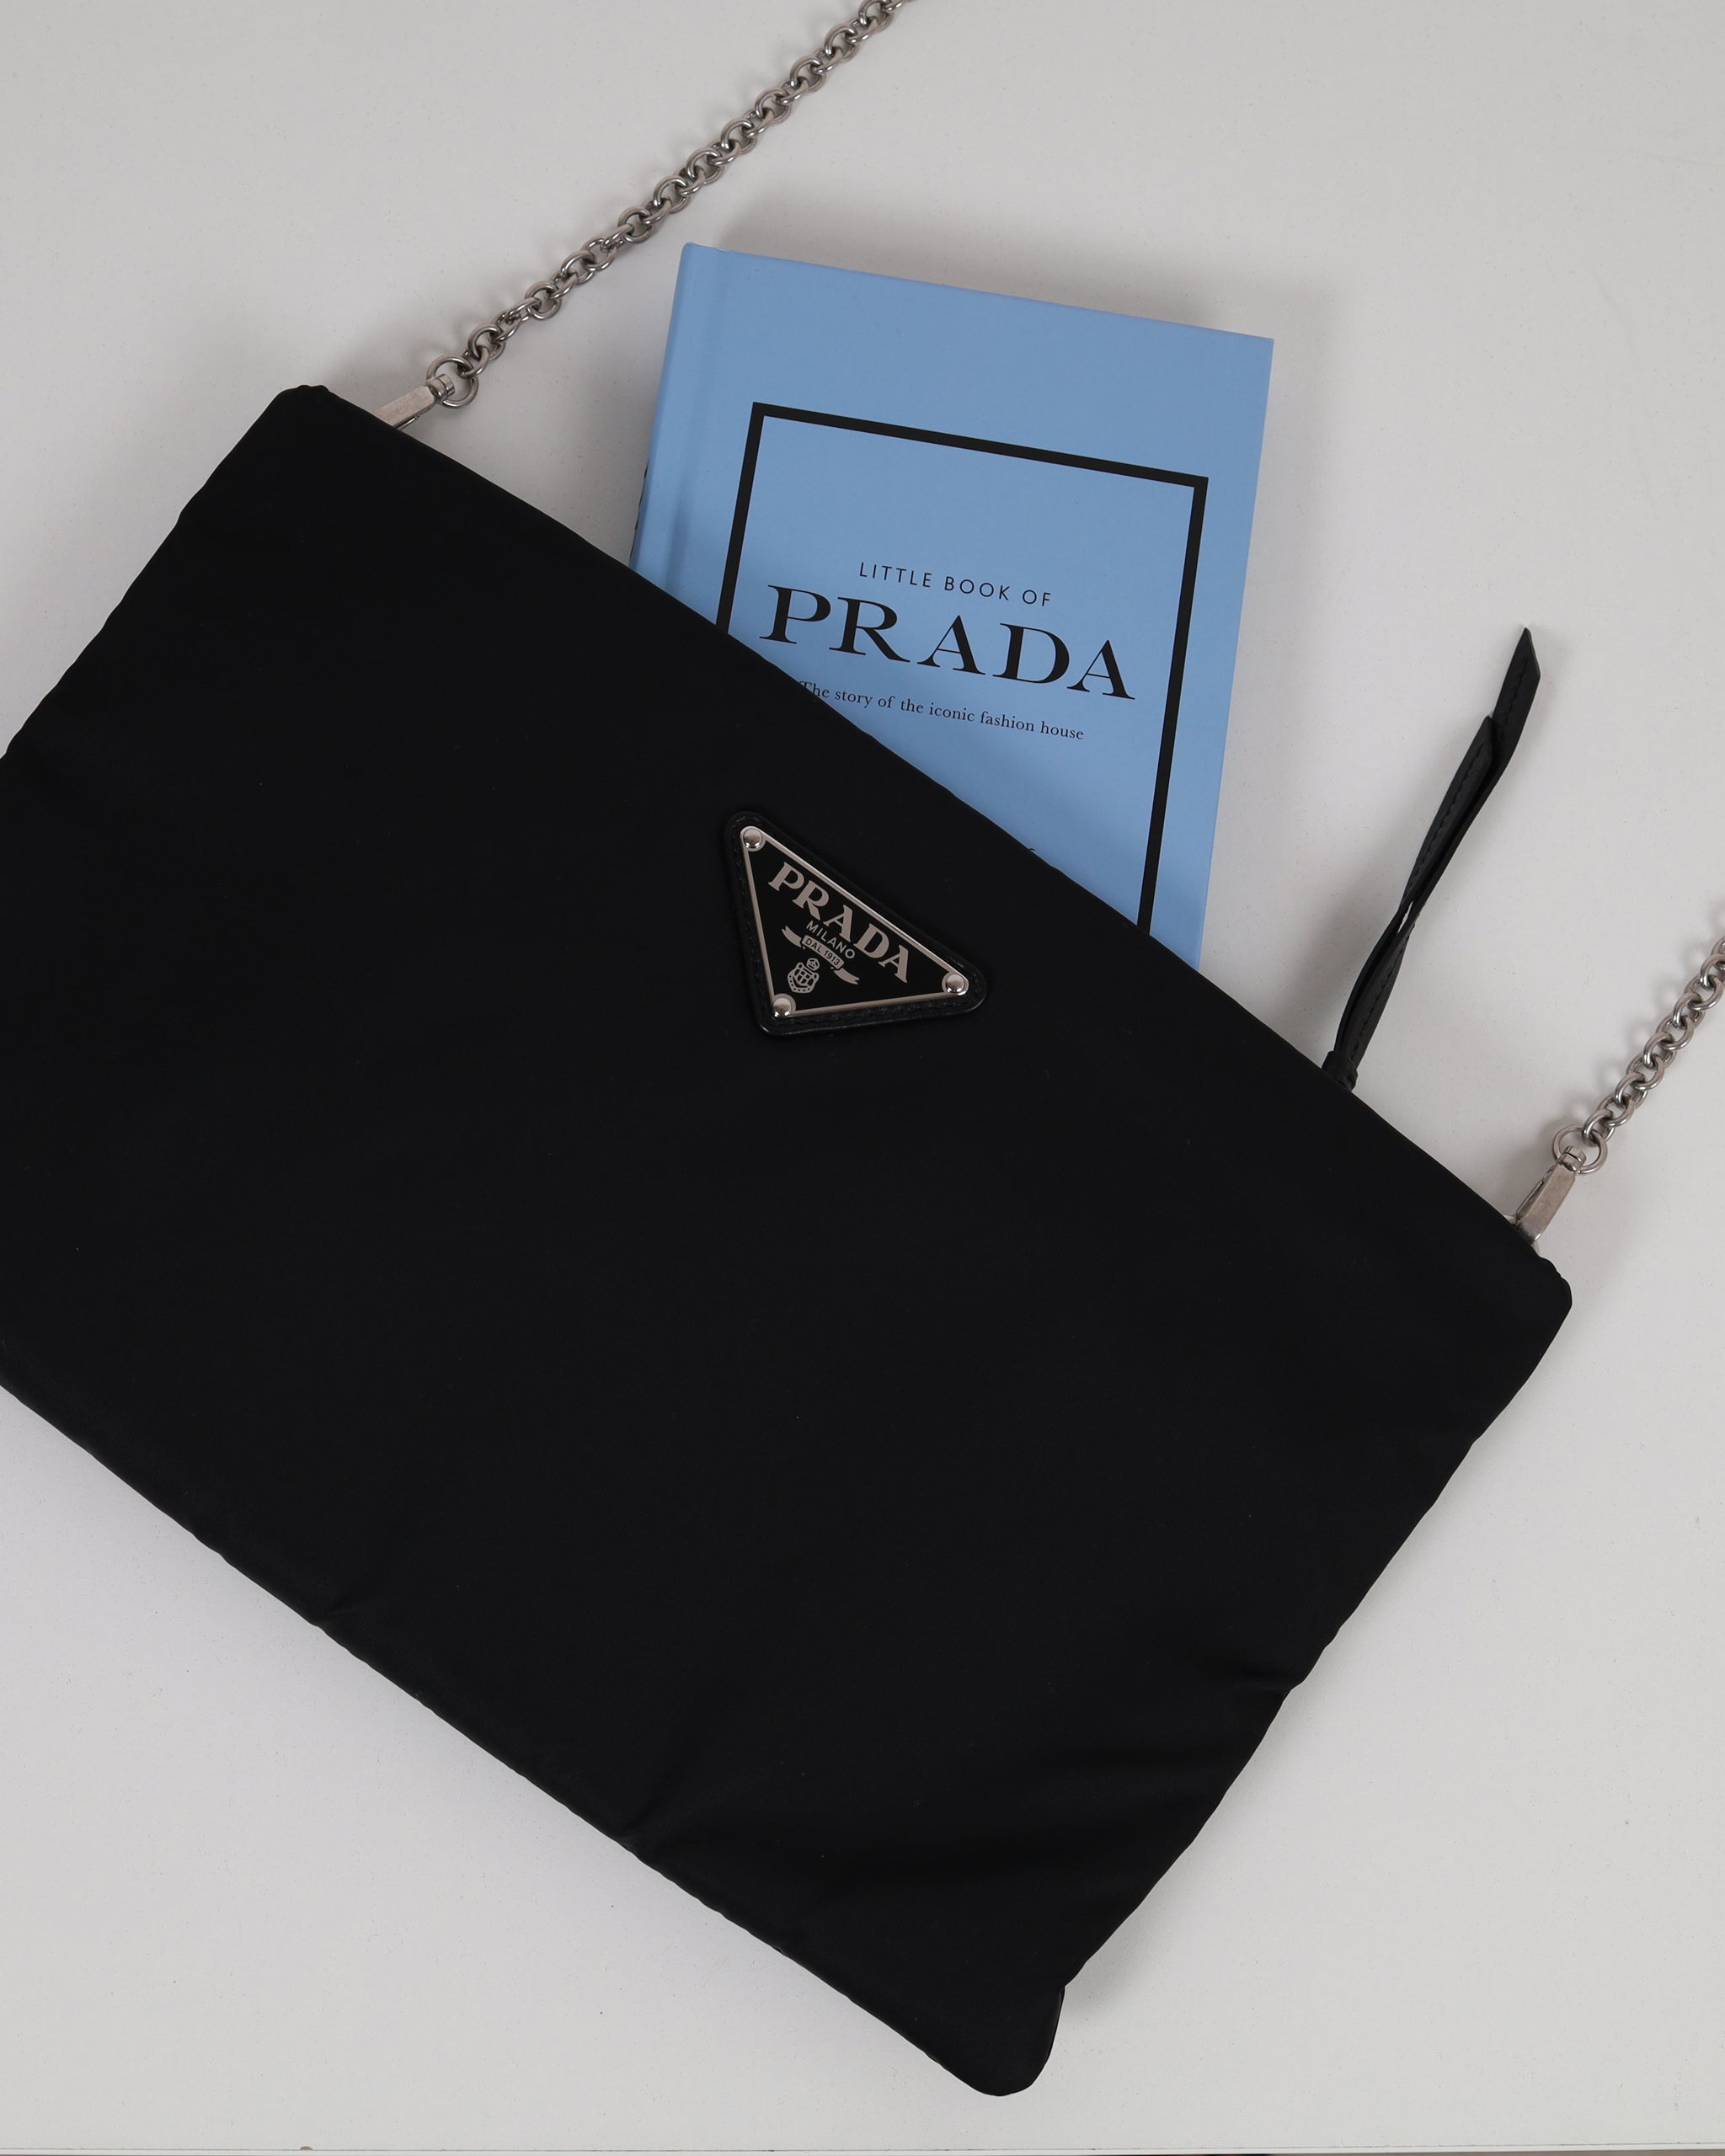 Prada Pouch bag in black with a Prada collections book inside